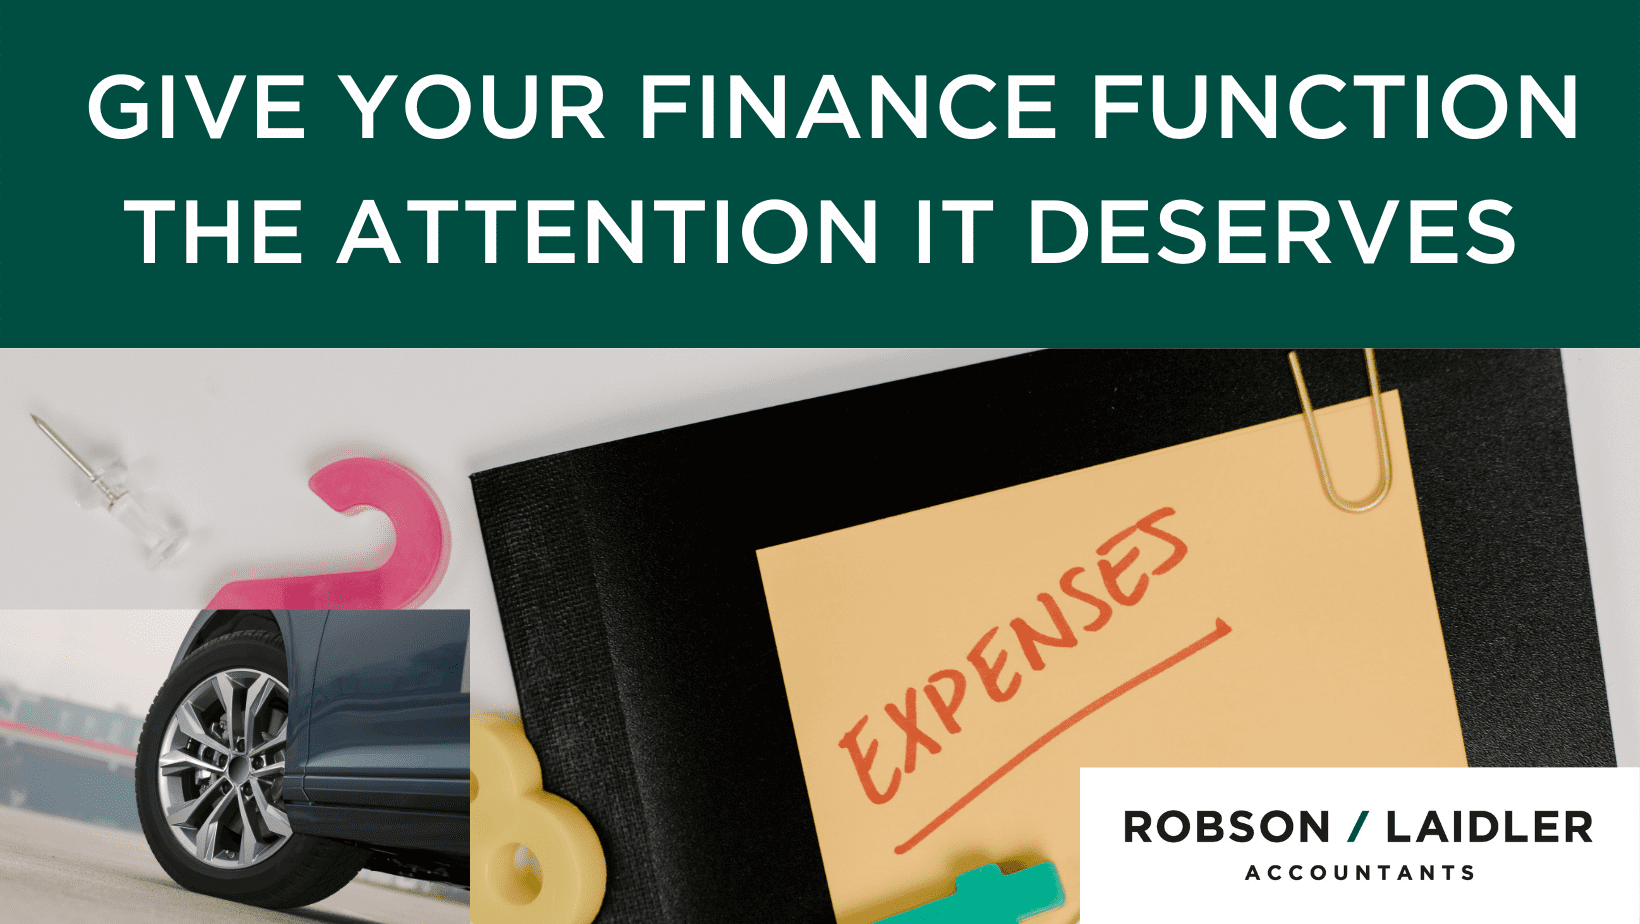 Give your finance function the attention it deserves.